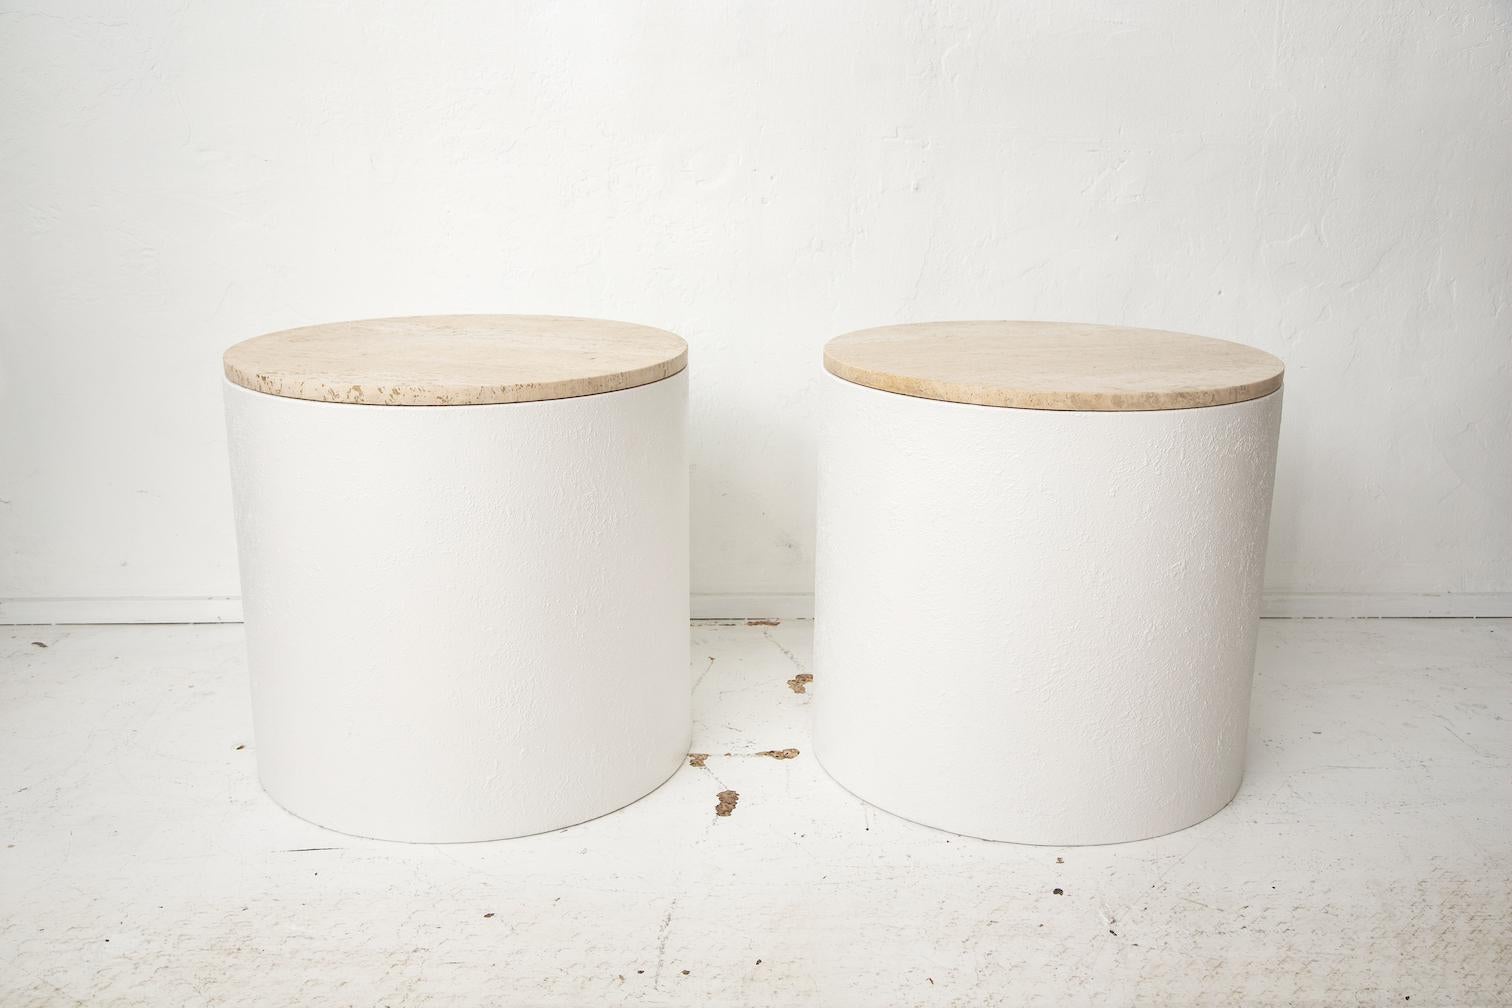 These impressive end tables are made of painted metal to resemble stone with travertine stone tops.
They can be used indoors or outdoors, or pulled together as a larger center table.
Beautiful neutral color palette.